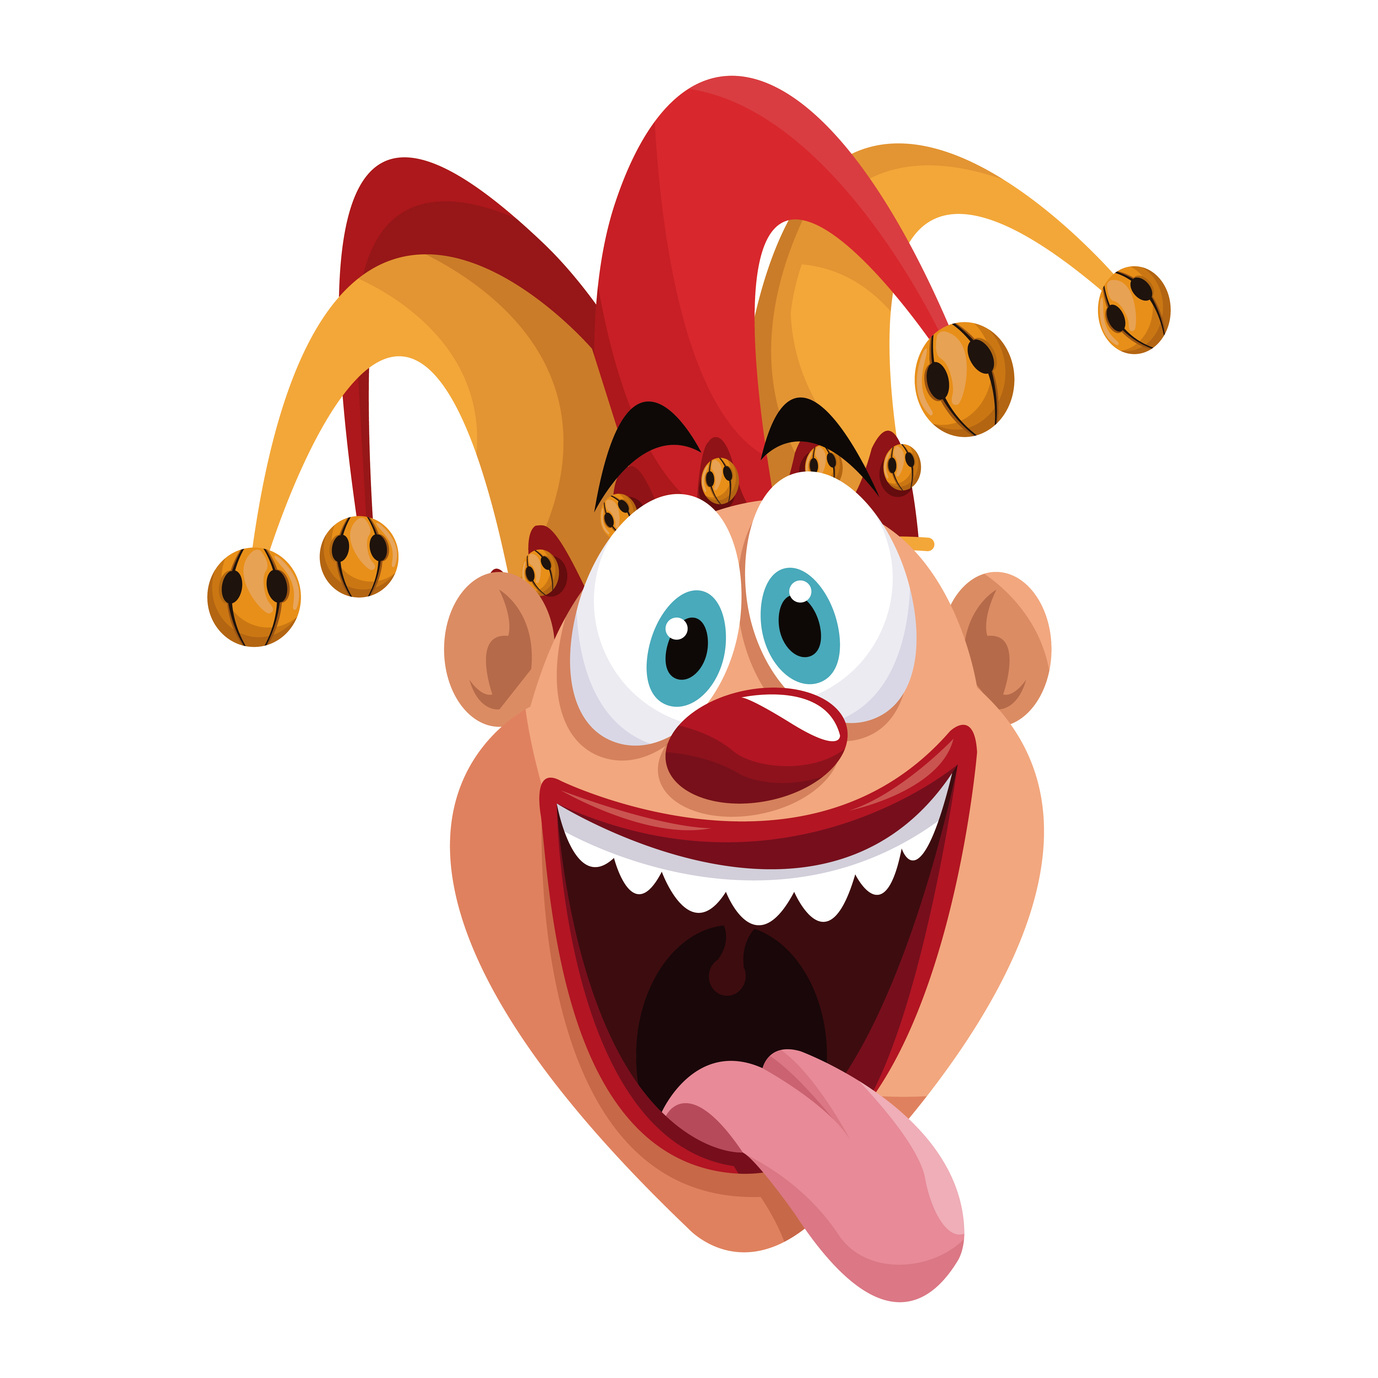 april fools day funny jester vector illustration eps 10